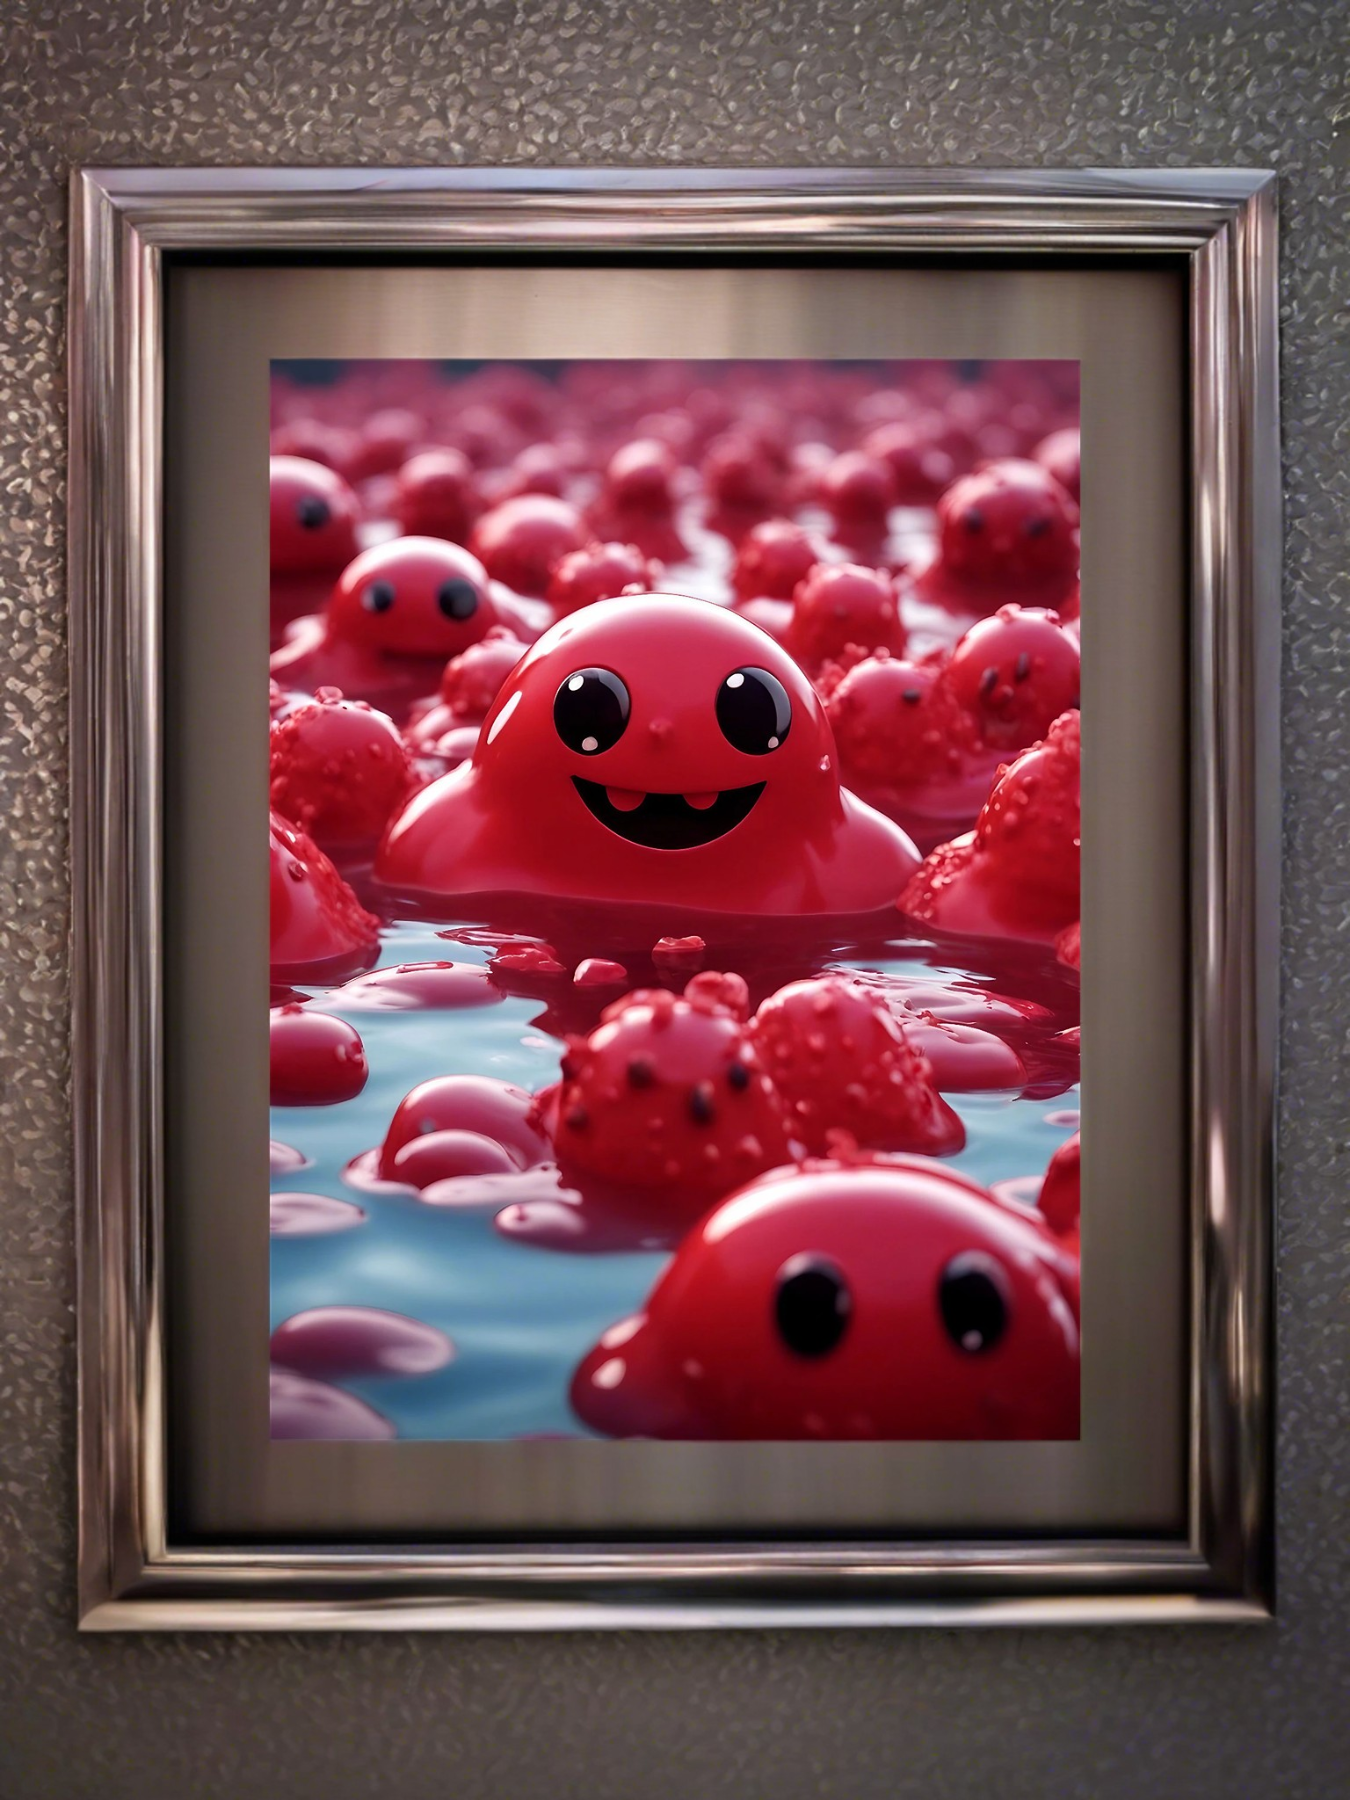 Invasion of the cute red slime monsters in the lake - fantasy mini photo poster - 27x20 cm 3